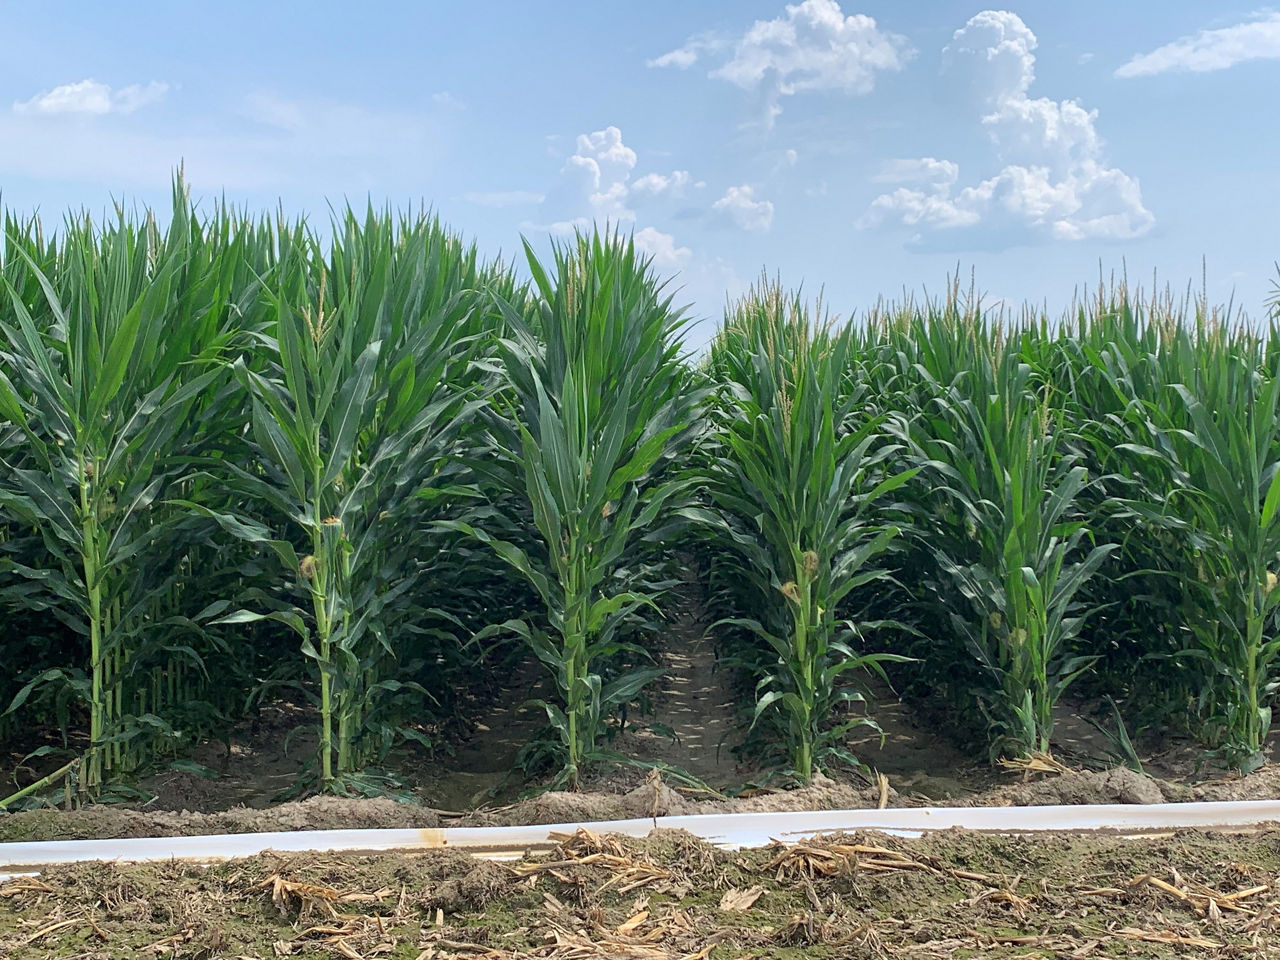 Figure 6.  Demonstration of the developmental differences between planting dates. (Left) Taller corn from the March 7th planting date compared to the height of corn with a March 28th planting date (right). 